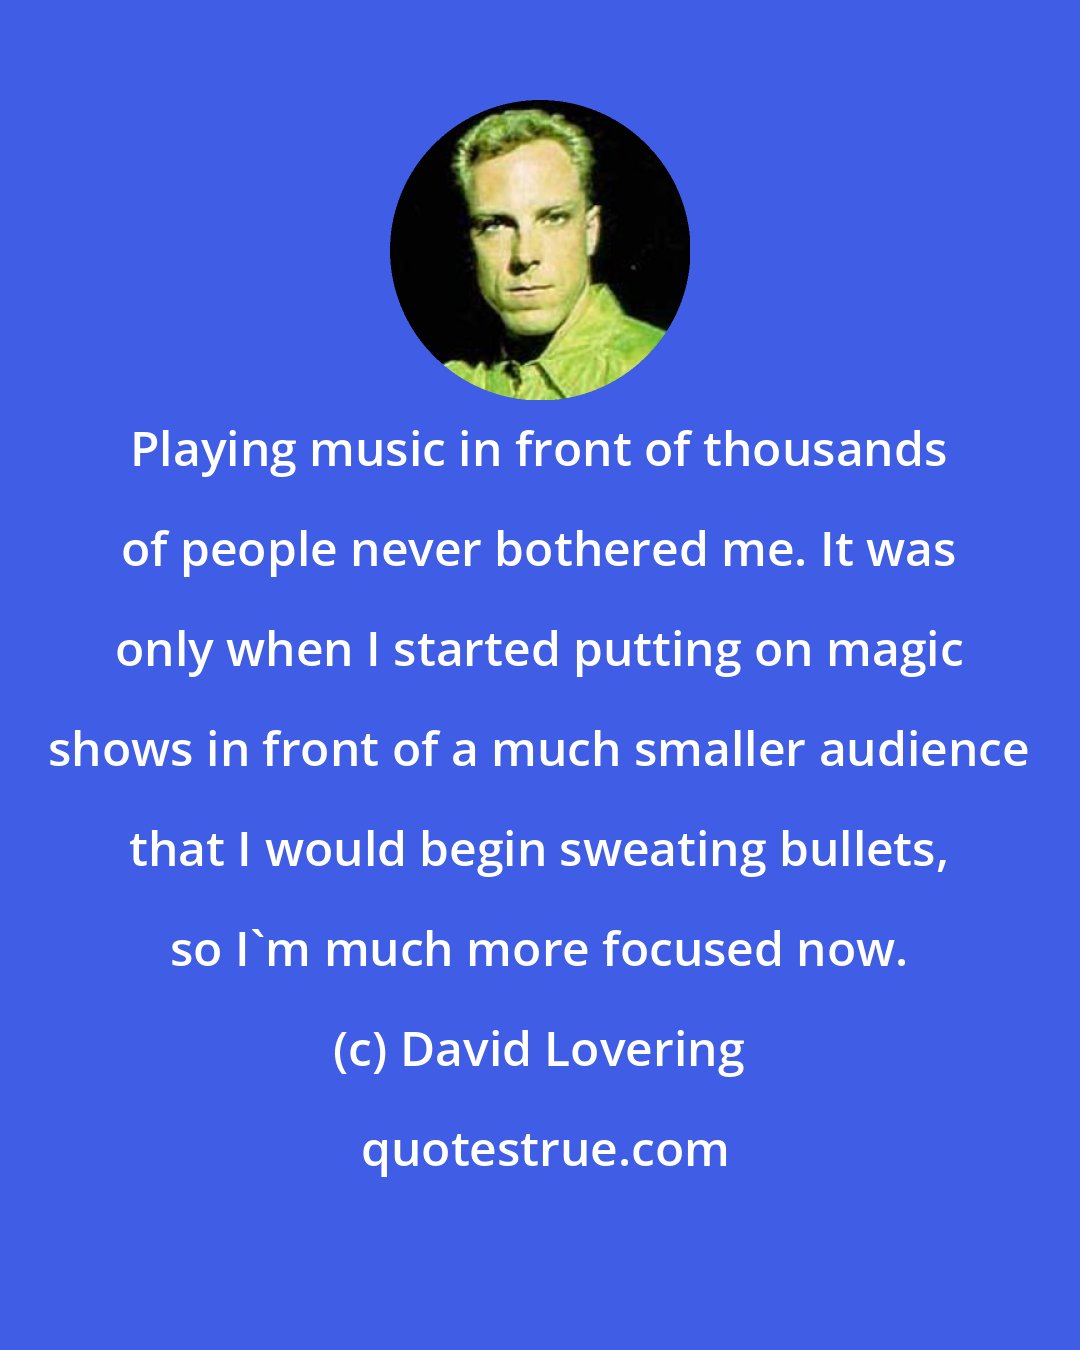 David Lovering: Playing music in front of thousands of people never bothered me. It was only when I started putting on magic shows in front of a much smaller audience that I would begin sweating bullets, so I'm much more focused now.